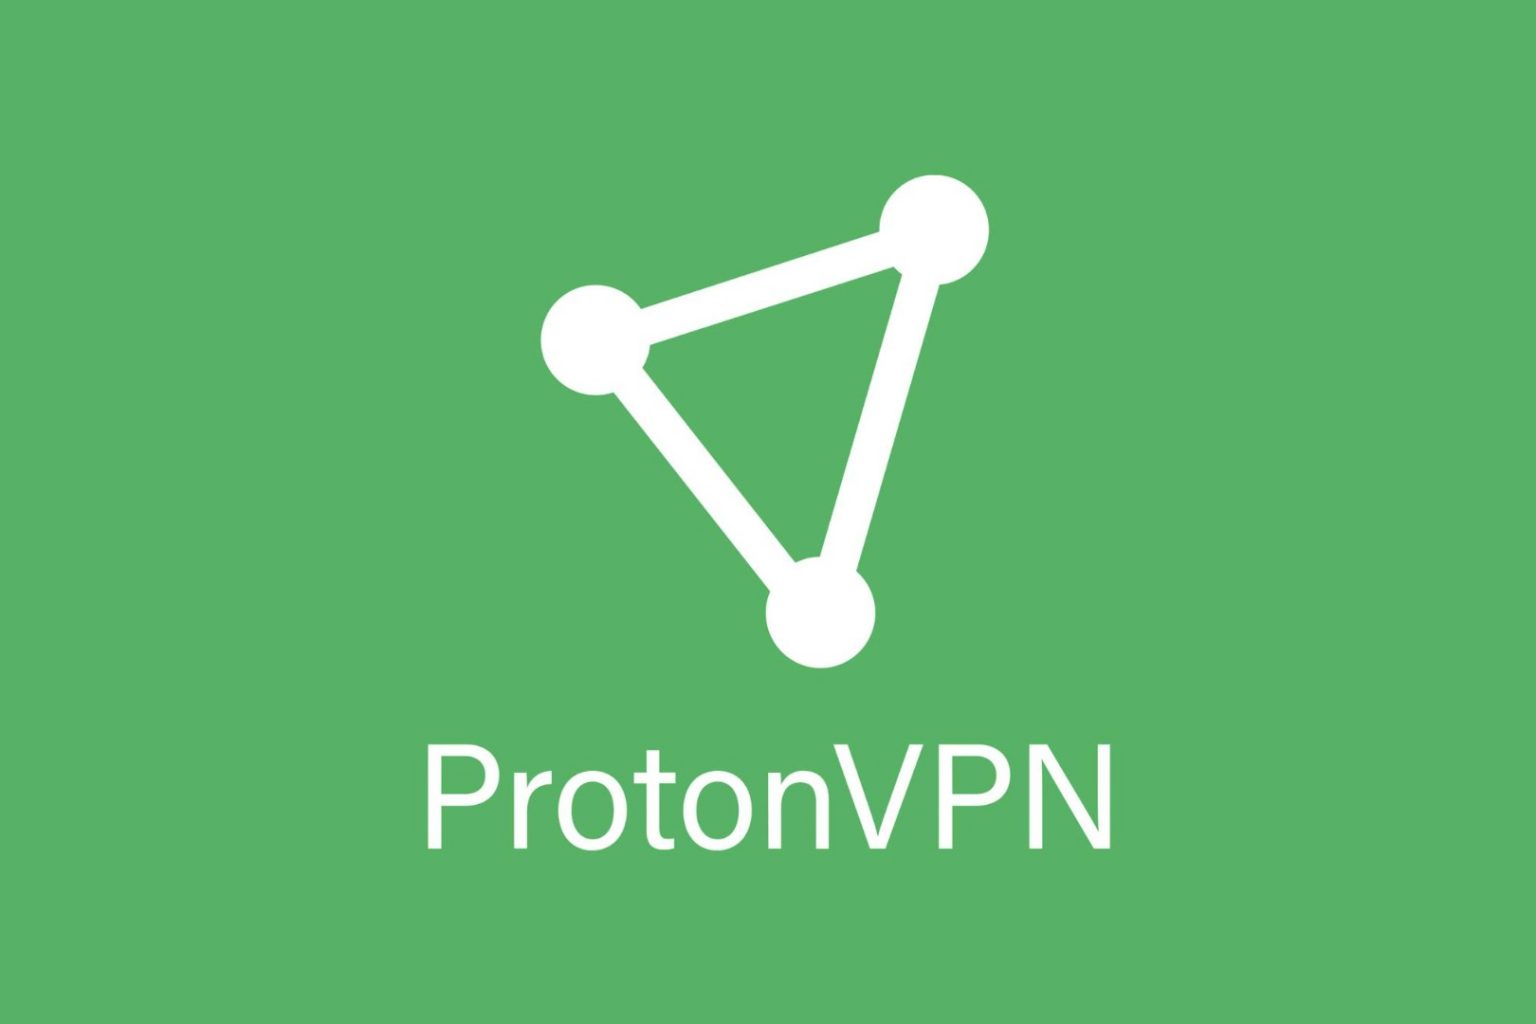 download the last version for android ProtonVPN Free 3.1.0